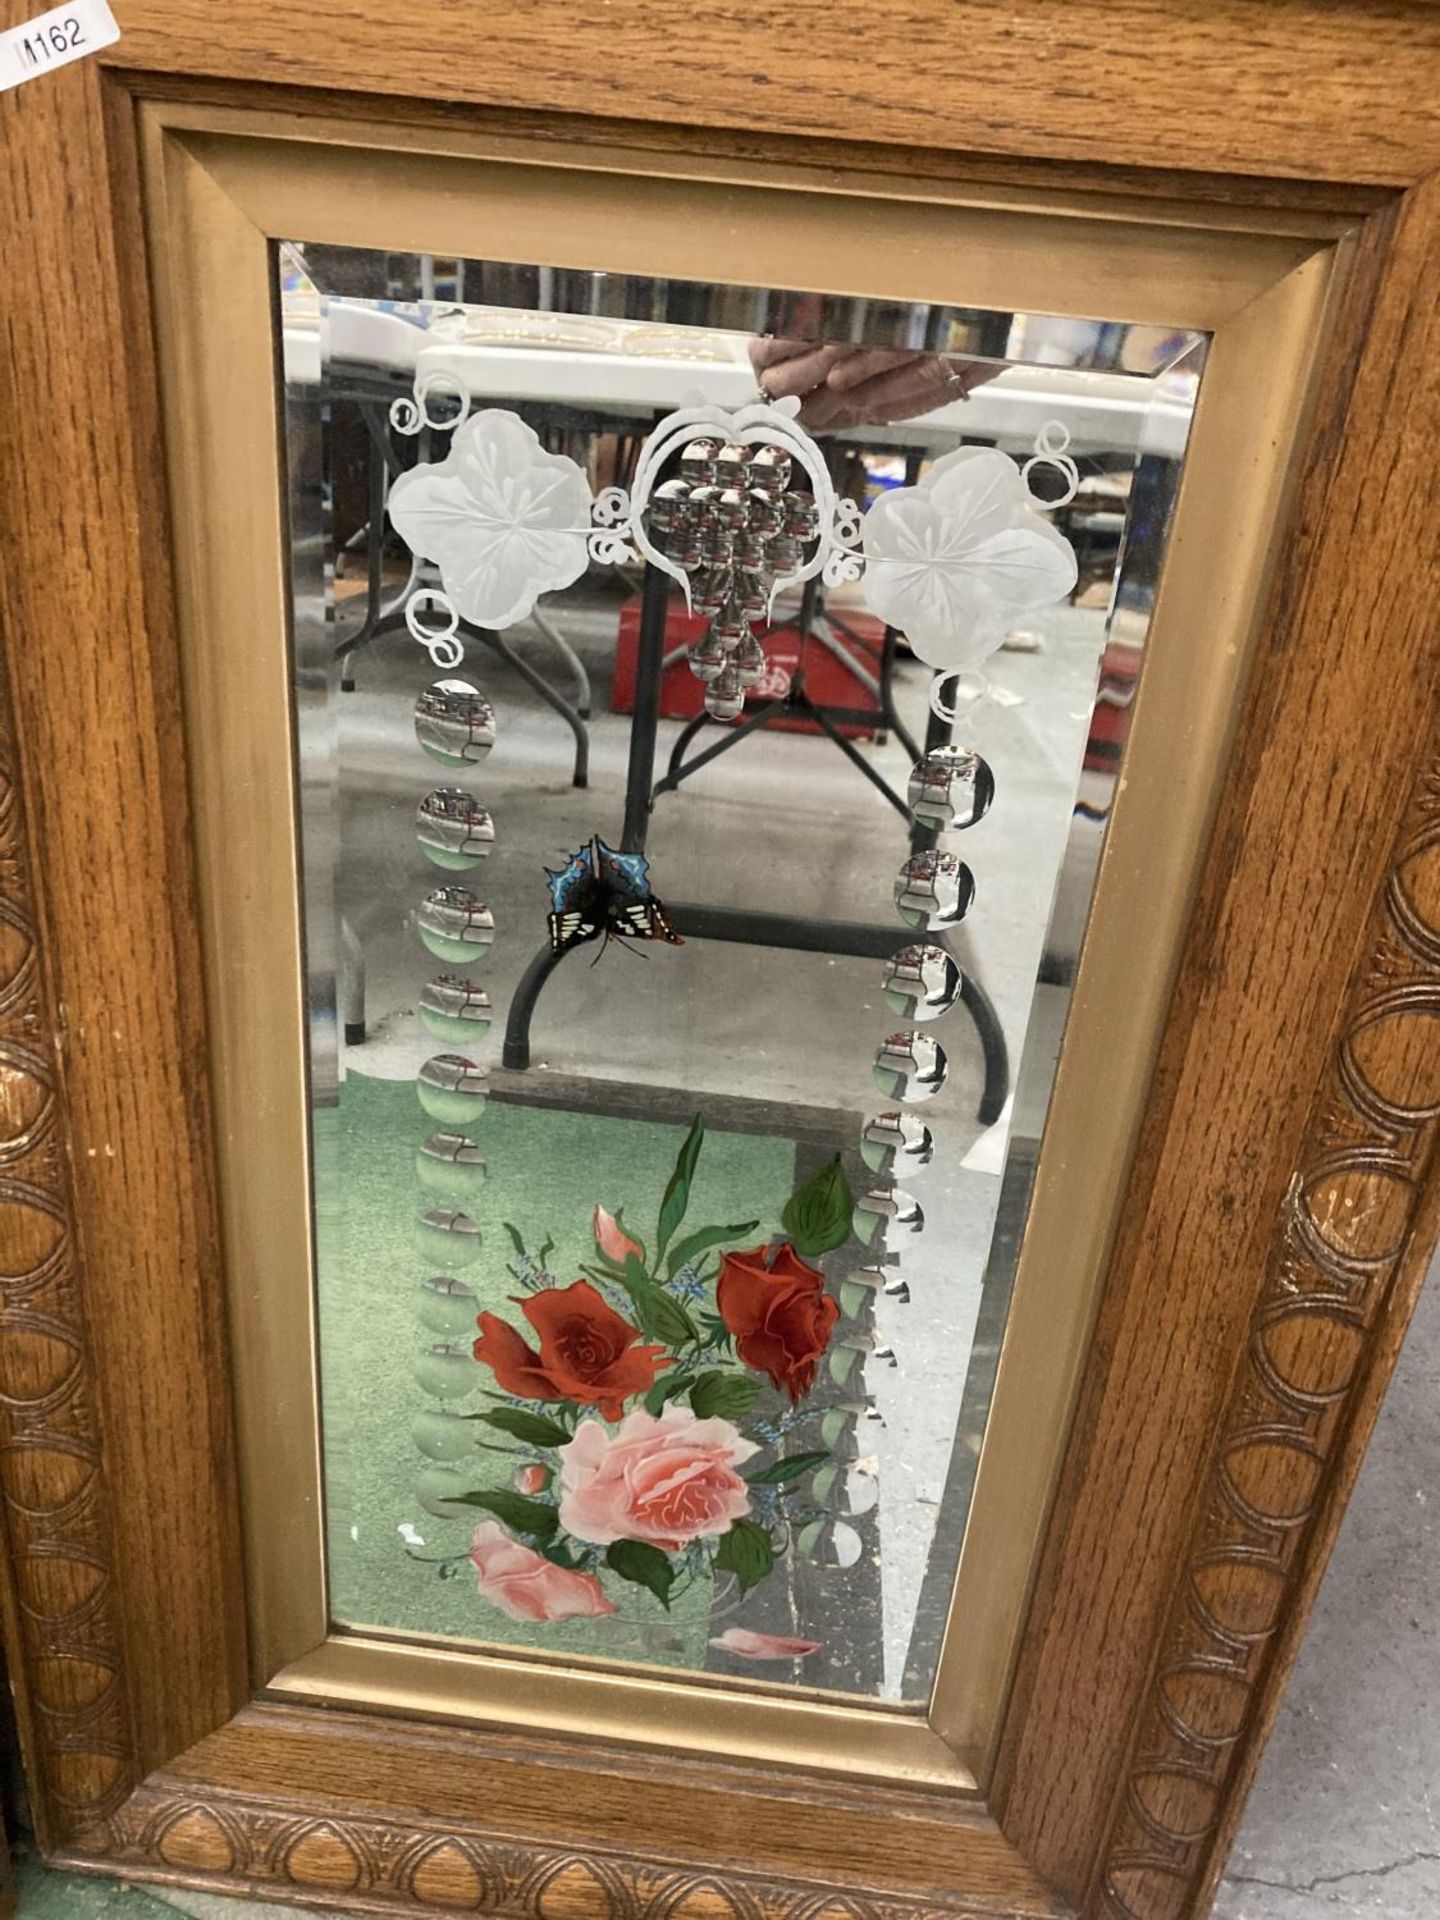 TWO OAK FRAMED DECORATIVE MIRRORS WITH FLOWERS AND BUTTERFLIES 20" X 33" - Image 2 of 3